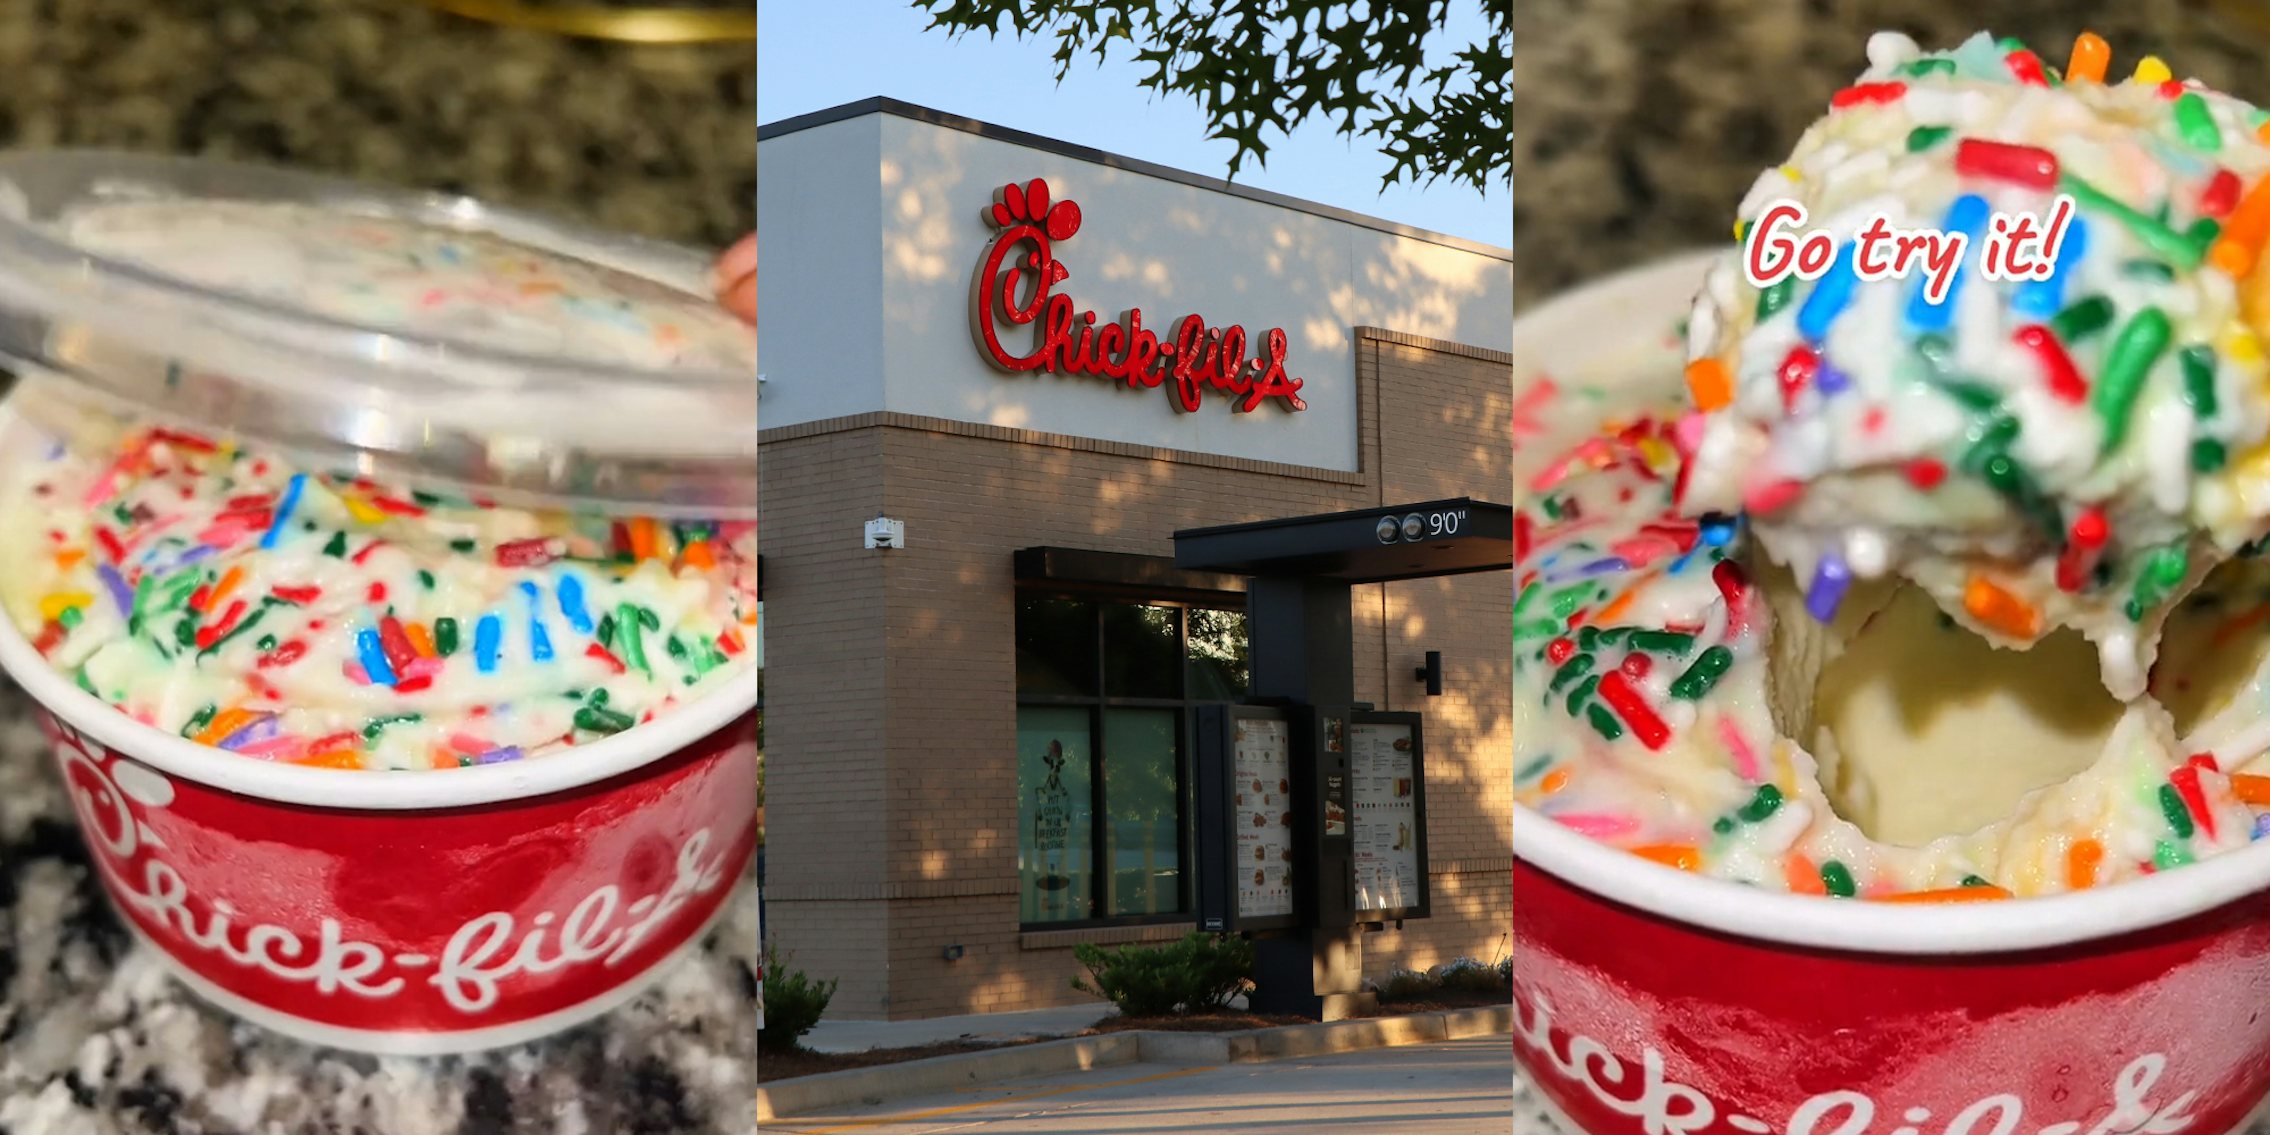 Chick-Fil-A cup with sprinkles dessert on counter (l) Chick-Fil-A drive thru with sign on building (c) Chick-Fil-A cup with sprinkles dessert on counter with caption 'Go try it!' (r)